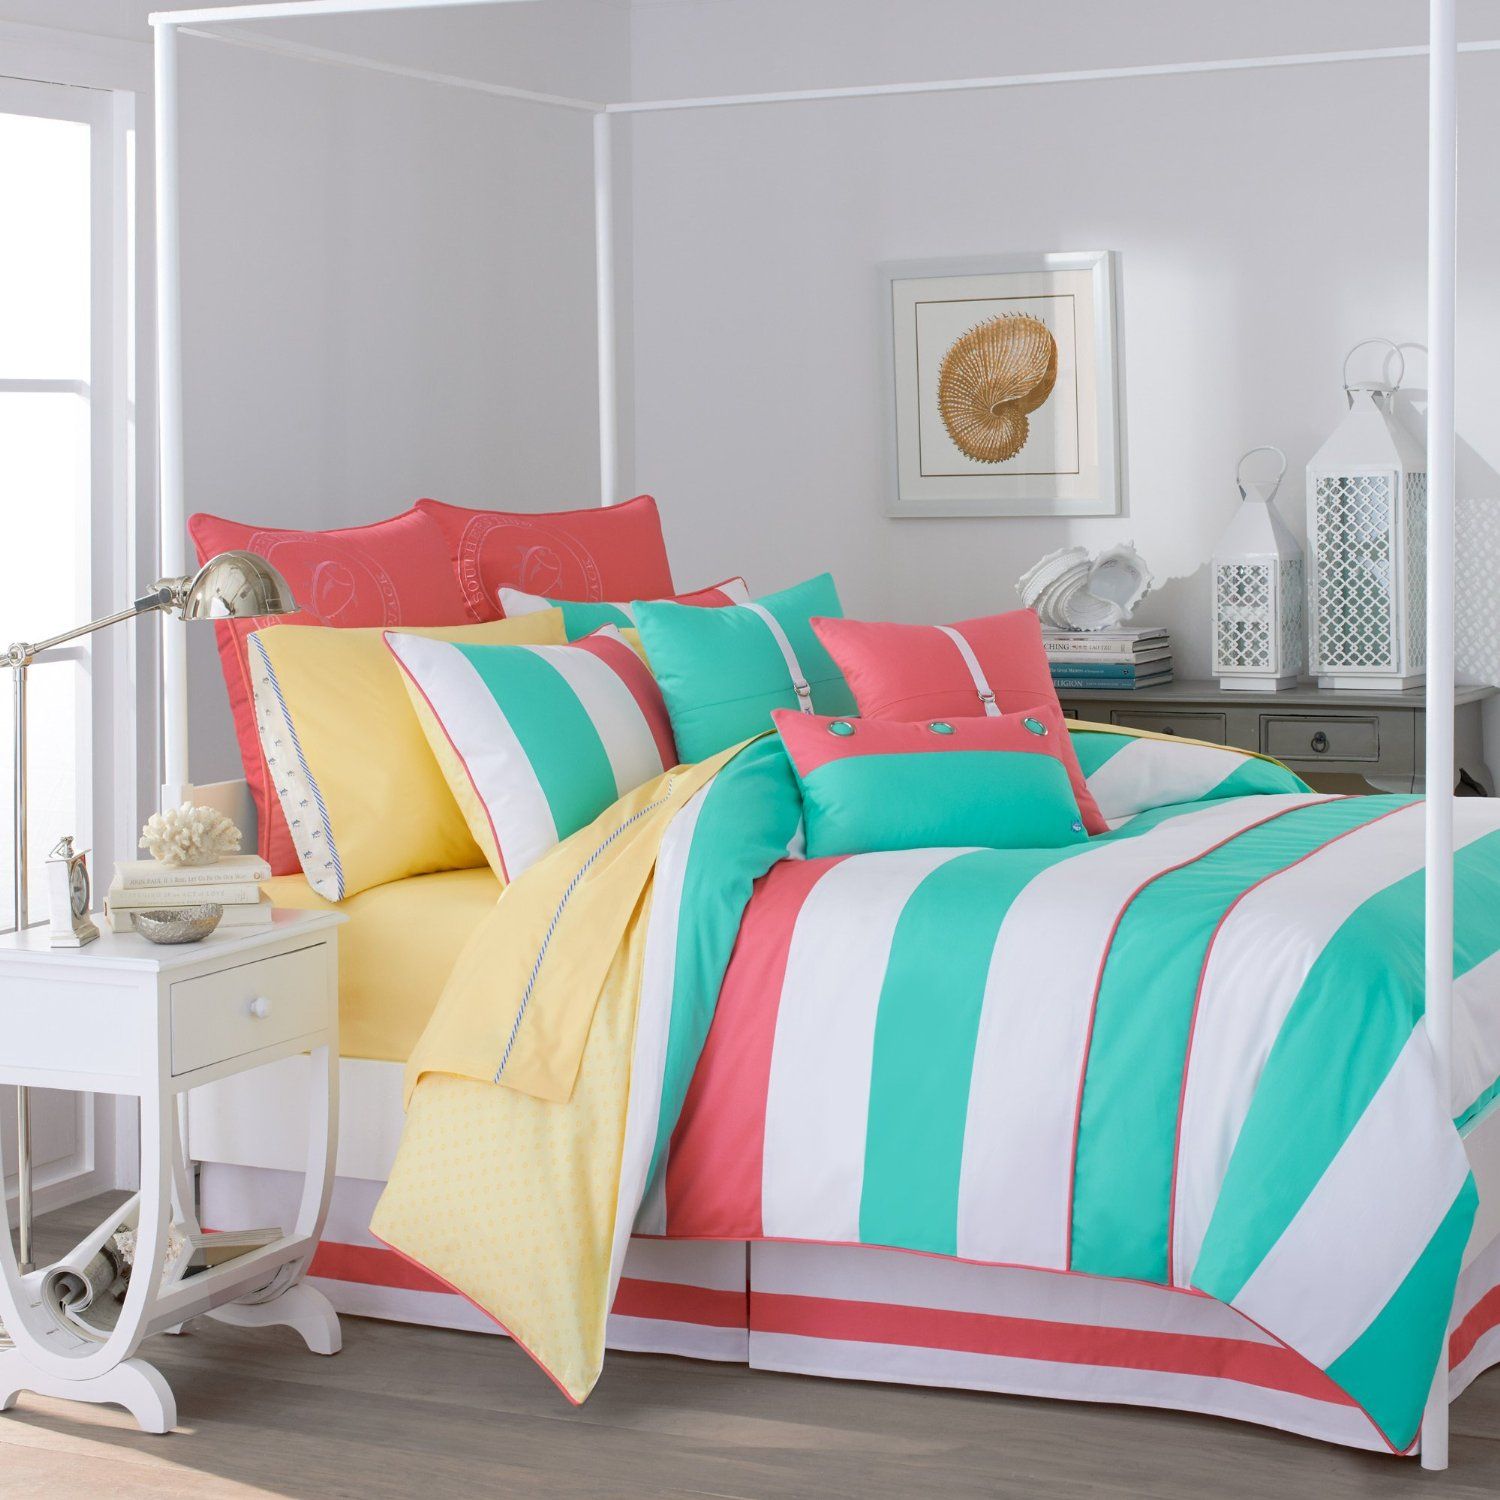 Colorful Stripe Bedding for Teen Girls